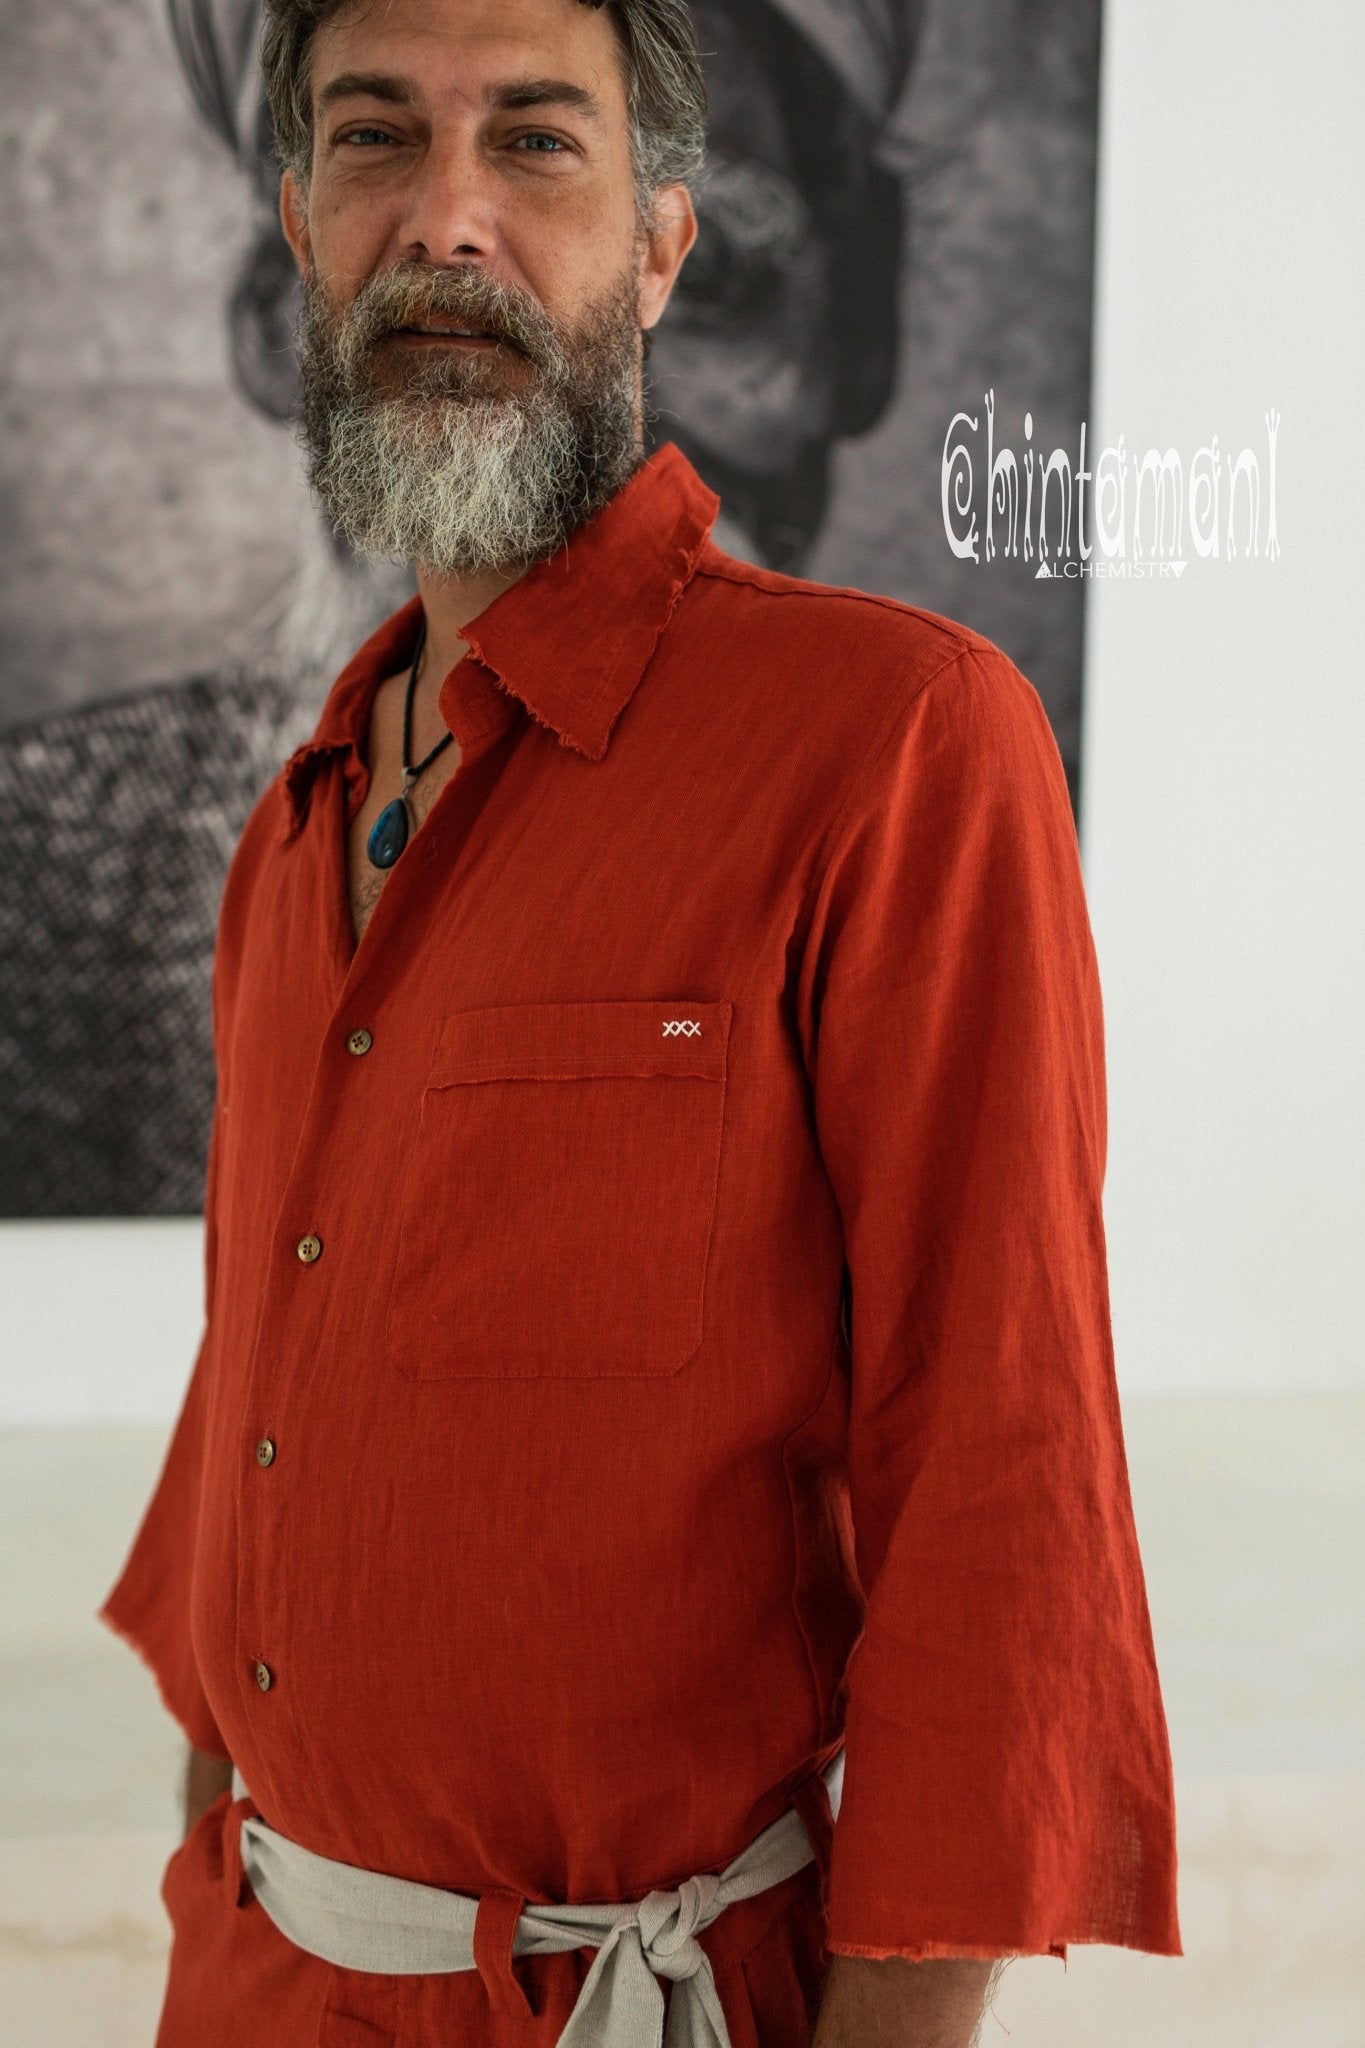 for 3/4 Ohre Overalls with ChintamaniAlchemi Coverall / Jumpsuit / Red Belt – Men Linen